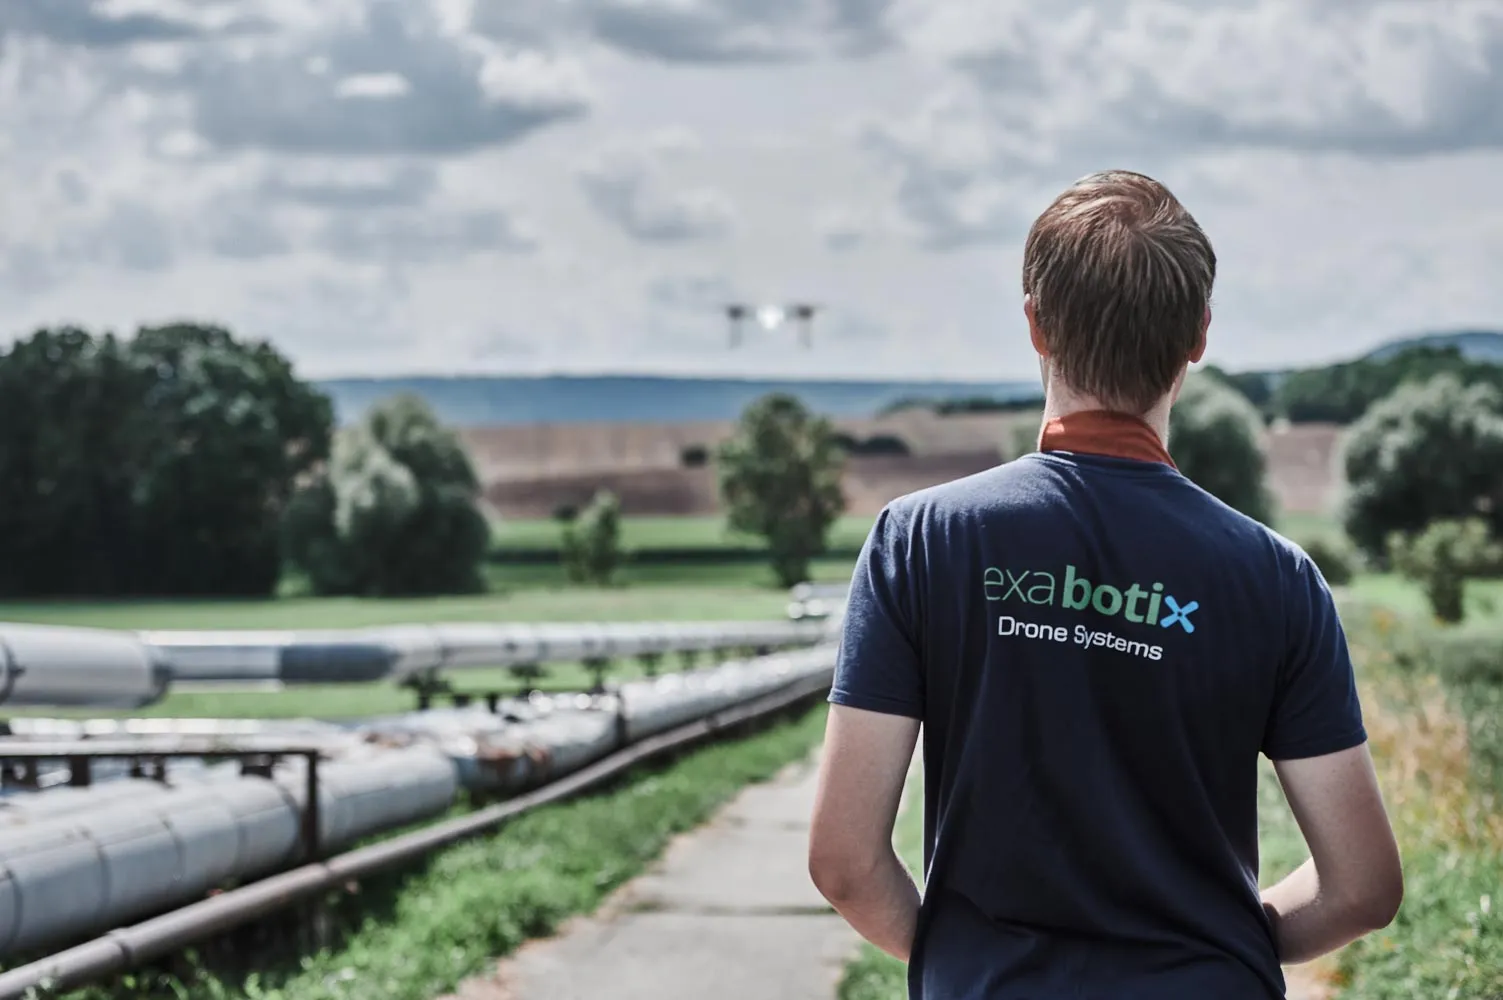 Exabotix employee controls drone in the distance over a pipeline running through an uninhabited landscape.